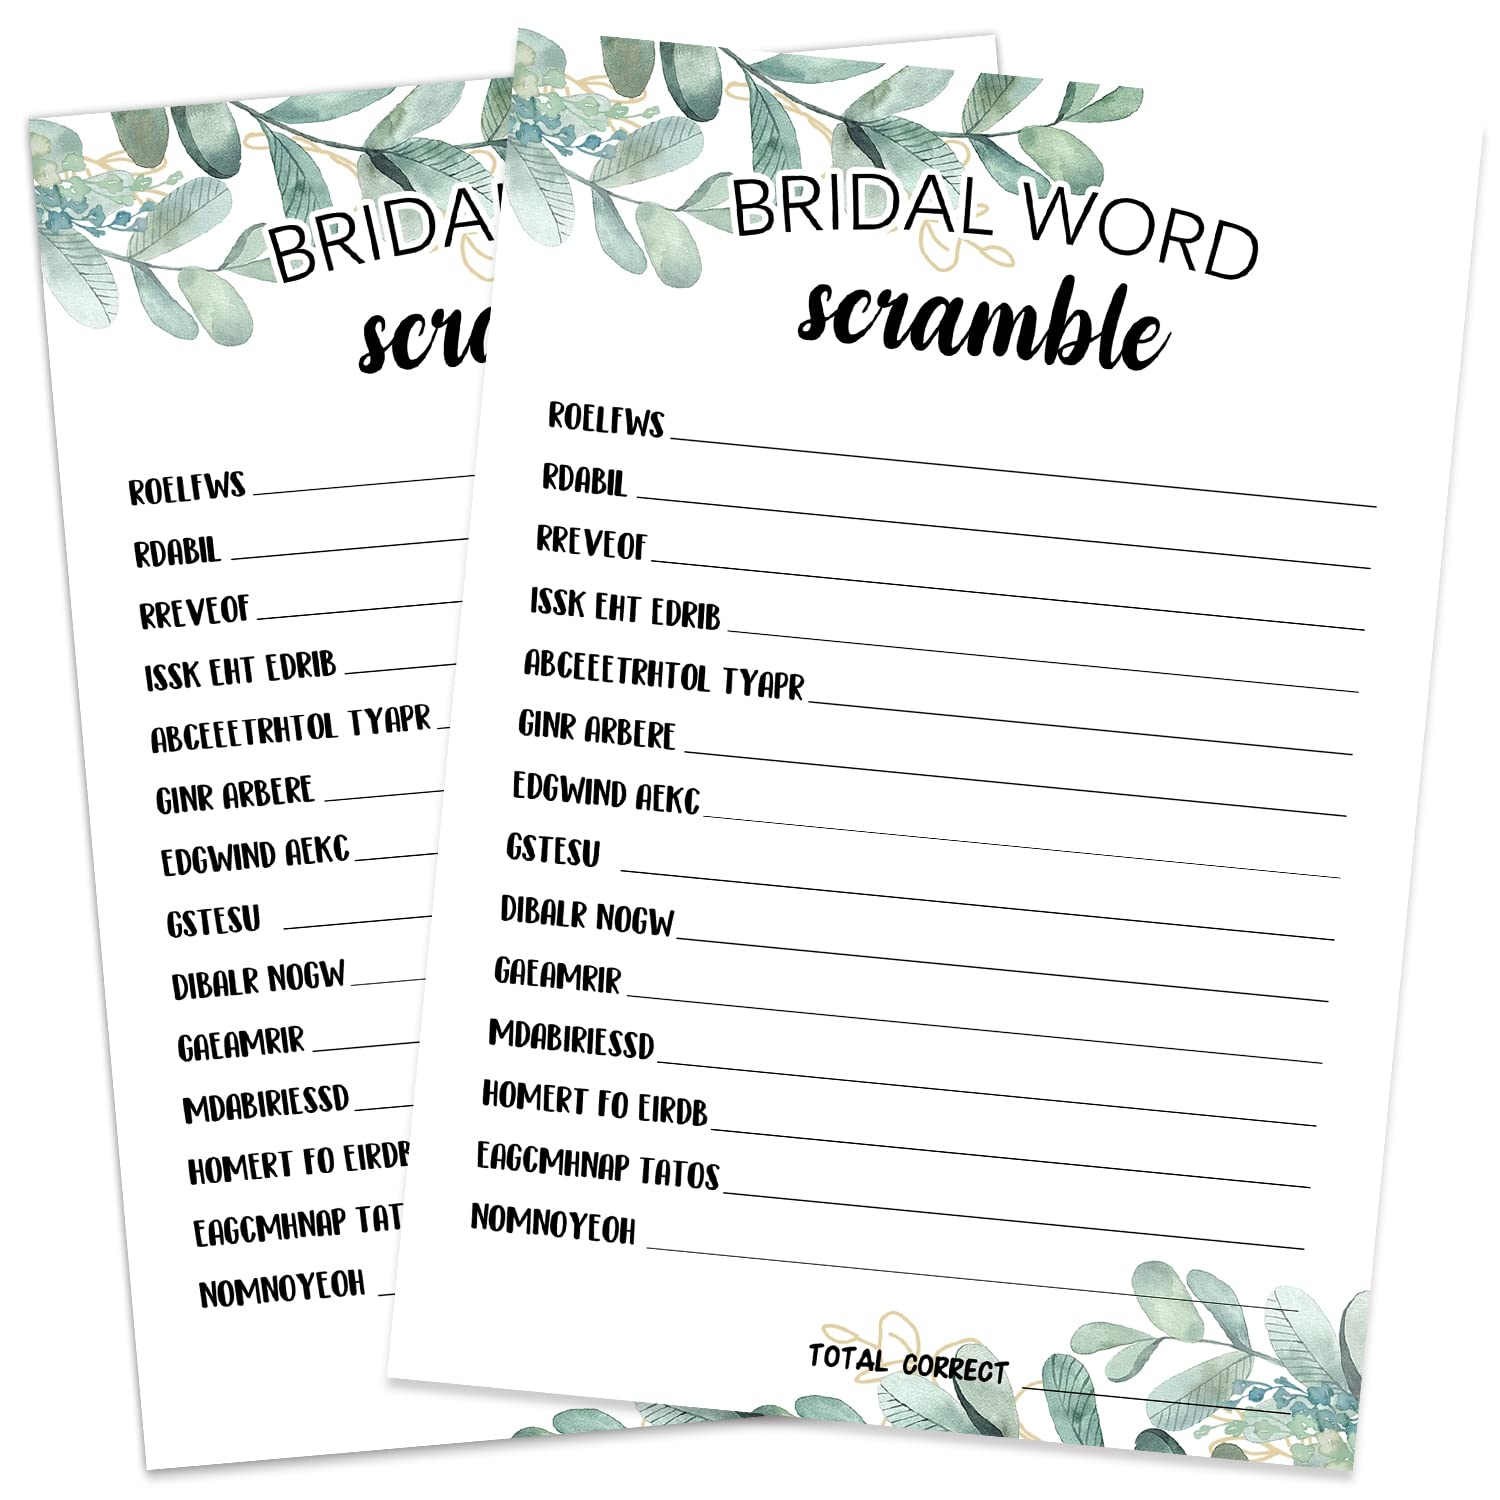 Amazon Bridal Shower Game Cards Bridal Word Scramble Game Greenery Theme Engagement Party Cards For Wedding Bridal Shower Decorations Engagement Activities Ideas Wedding Shower Party Game Card Home Kitchen - Free Printable Bridal Shower Games Word Scramble